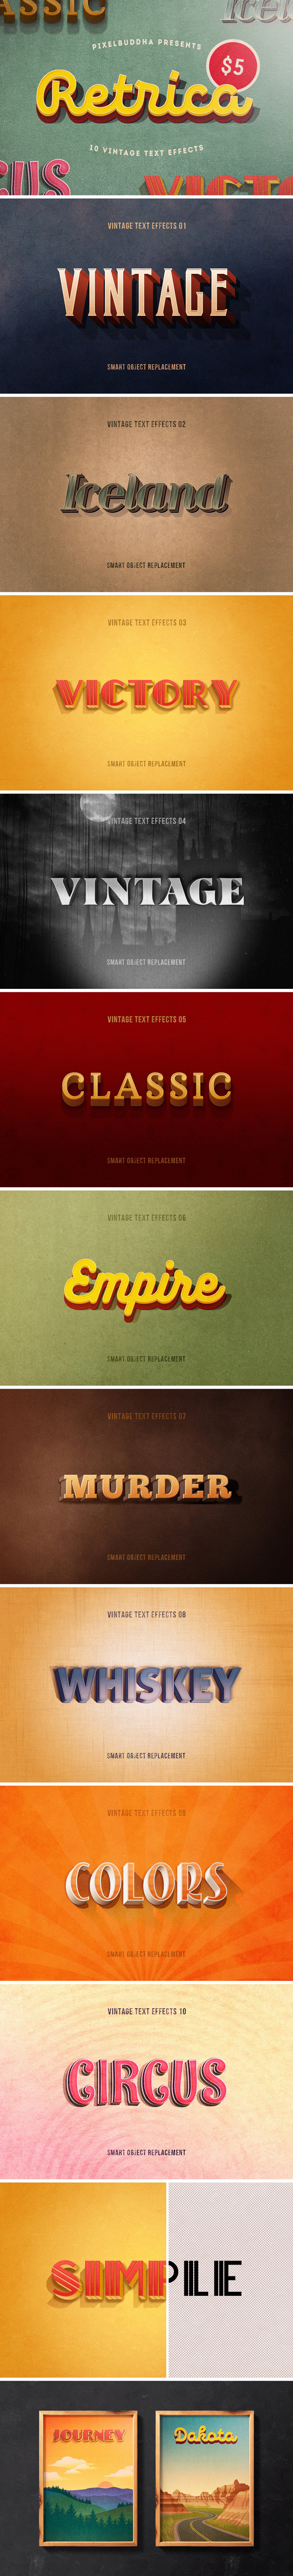 Retrica: Vintage Text Effects Pack